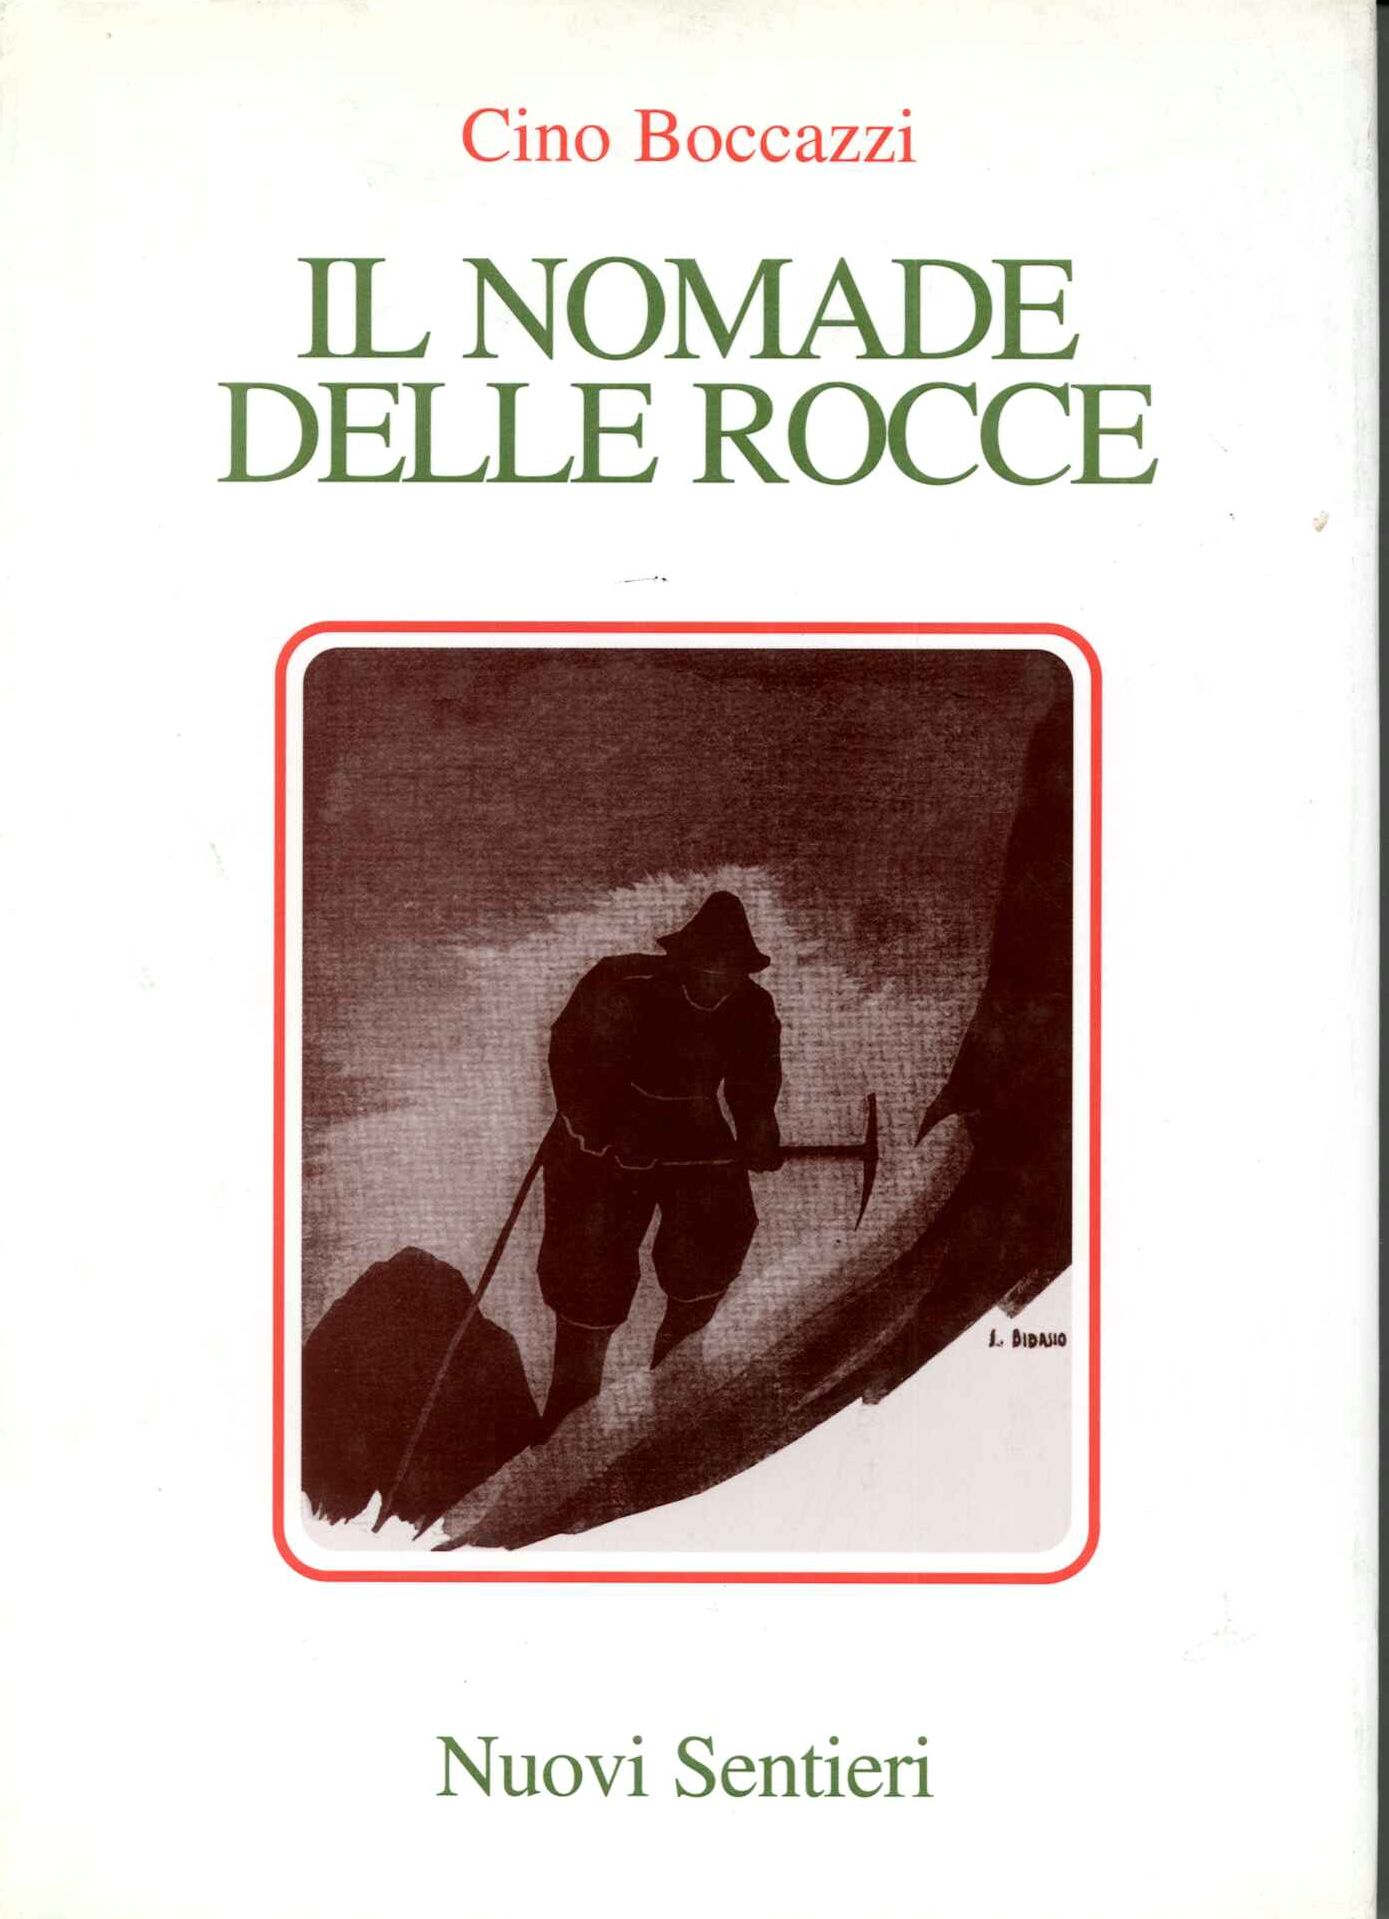 Nomade delle rocce